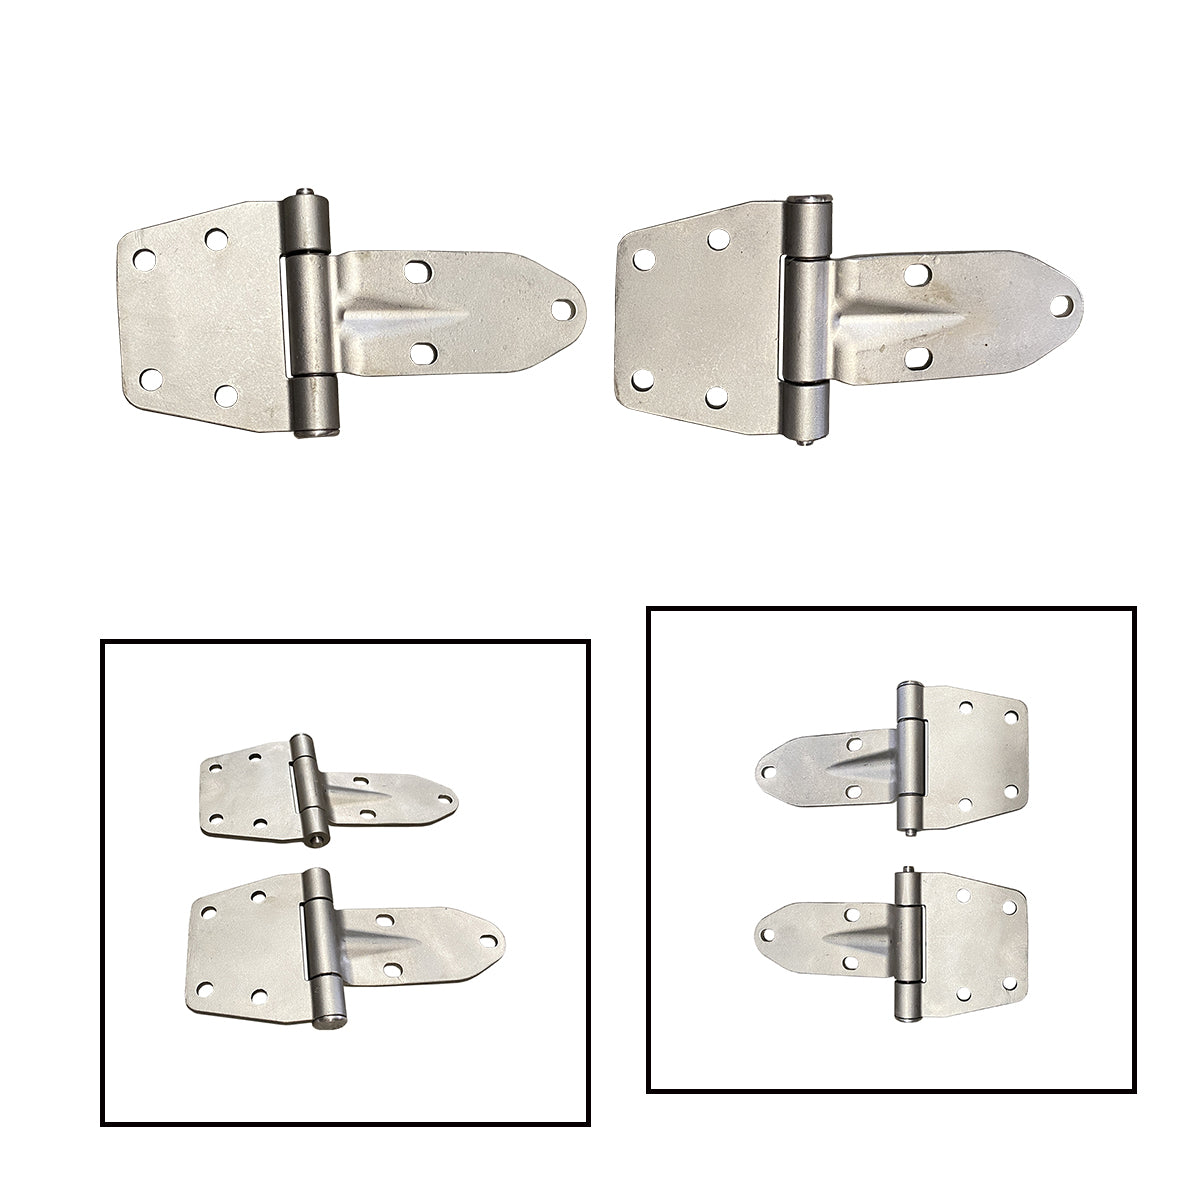 Front door hinges. Upper and Lower hinges for one door. Stainless Steel, for FJ40, FJ45 Toyota Land Cruiser